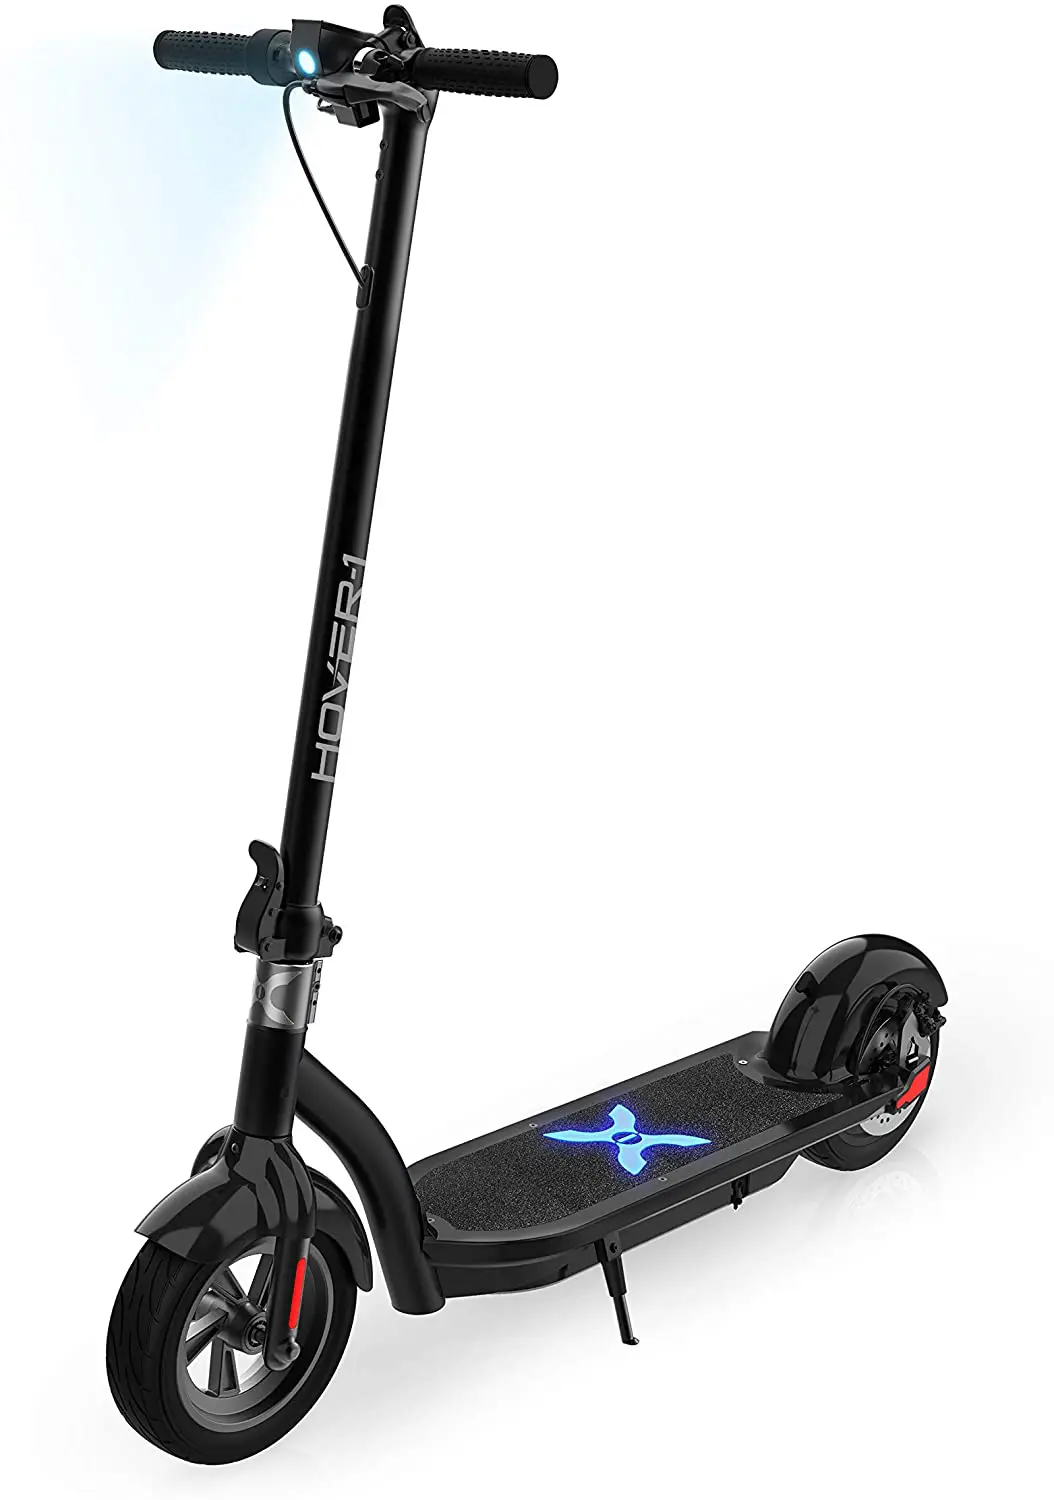 Best Electric Scooter With Lights – LED Headlights For Safe Travel